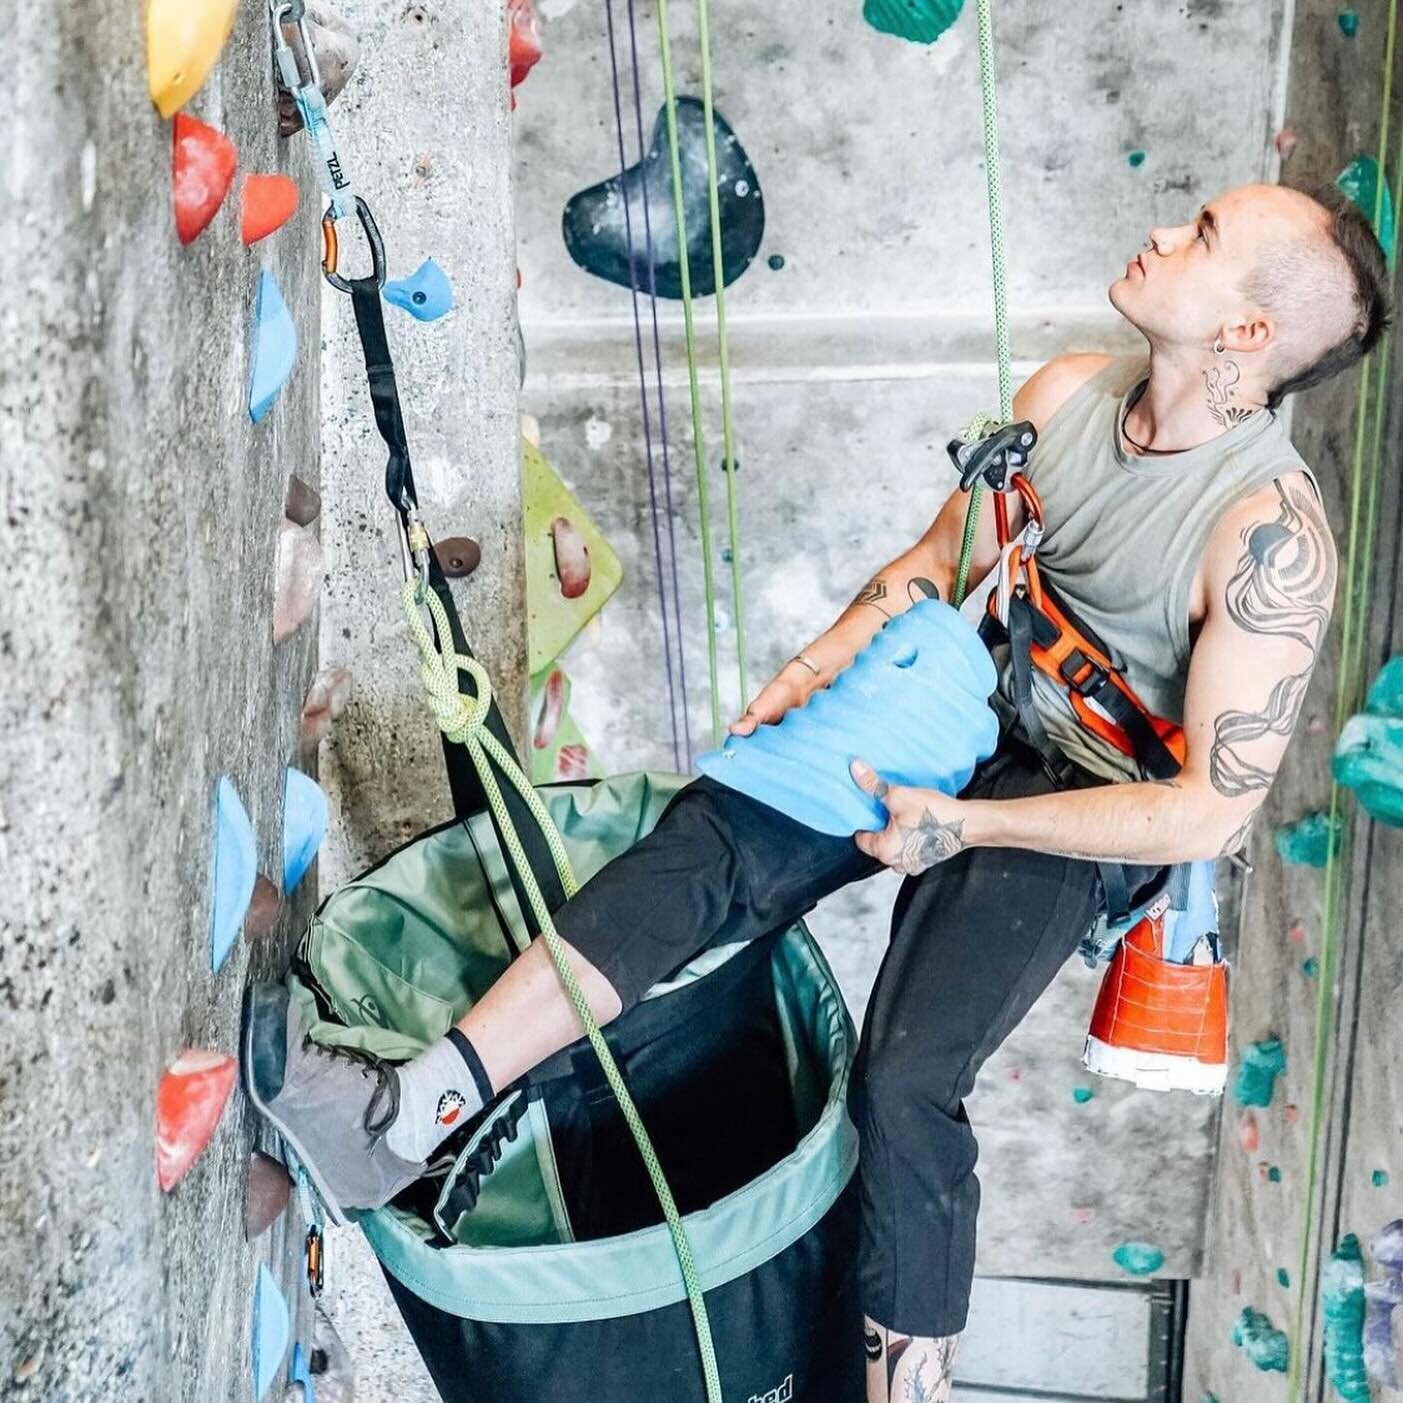 ✨SETTER SPOTLIGHT✨
We are PSYCHED to shine the spotlight on Nico today! Nico (they/them) sets at Flagstaff Climbing and is going to be an instructor for an intermediate rope setting clinic on March 2nd at Flagstaff Climbing! We love it! 

How/when di